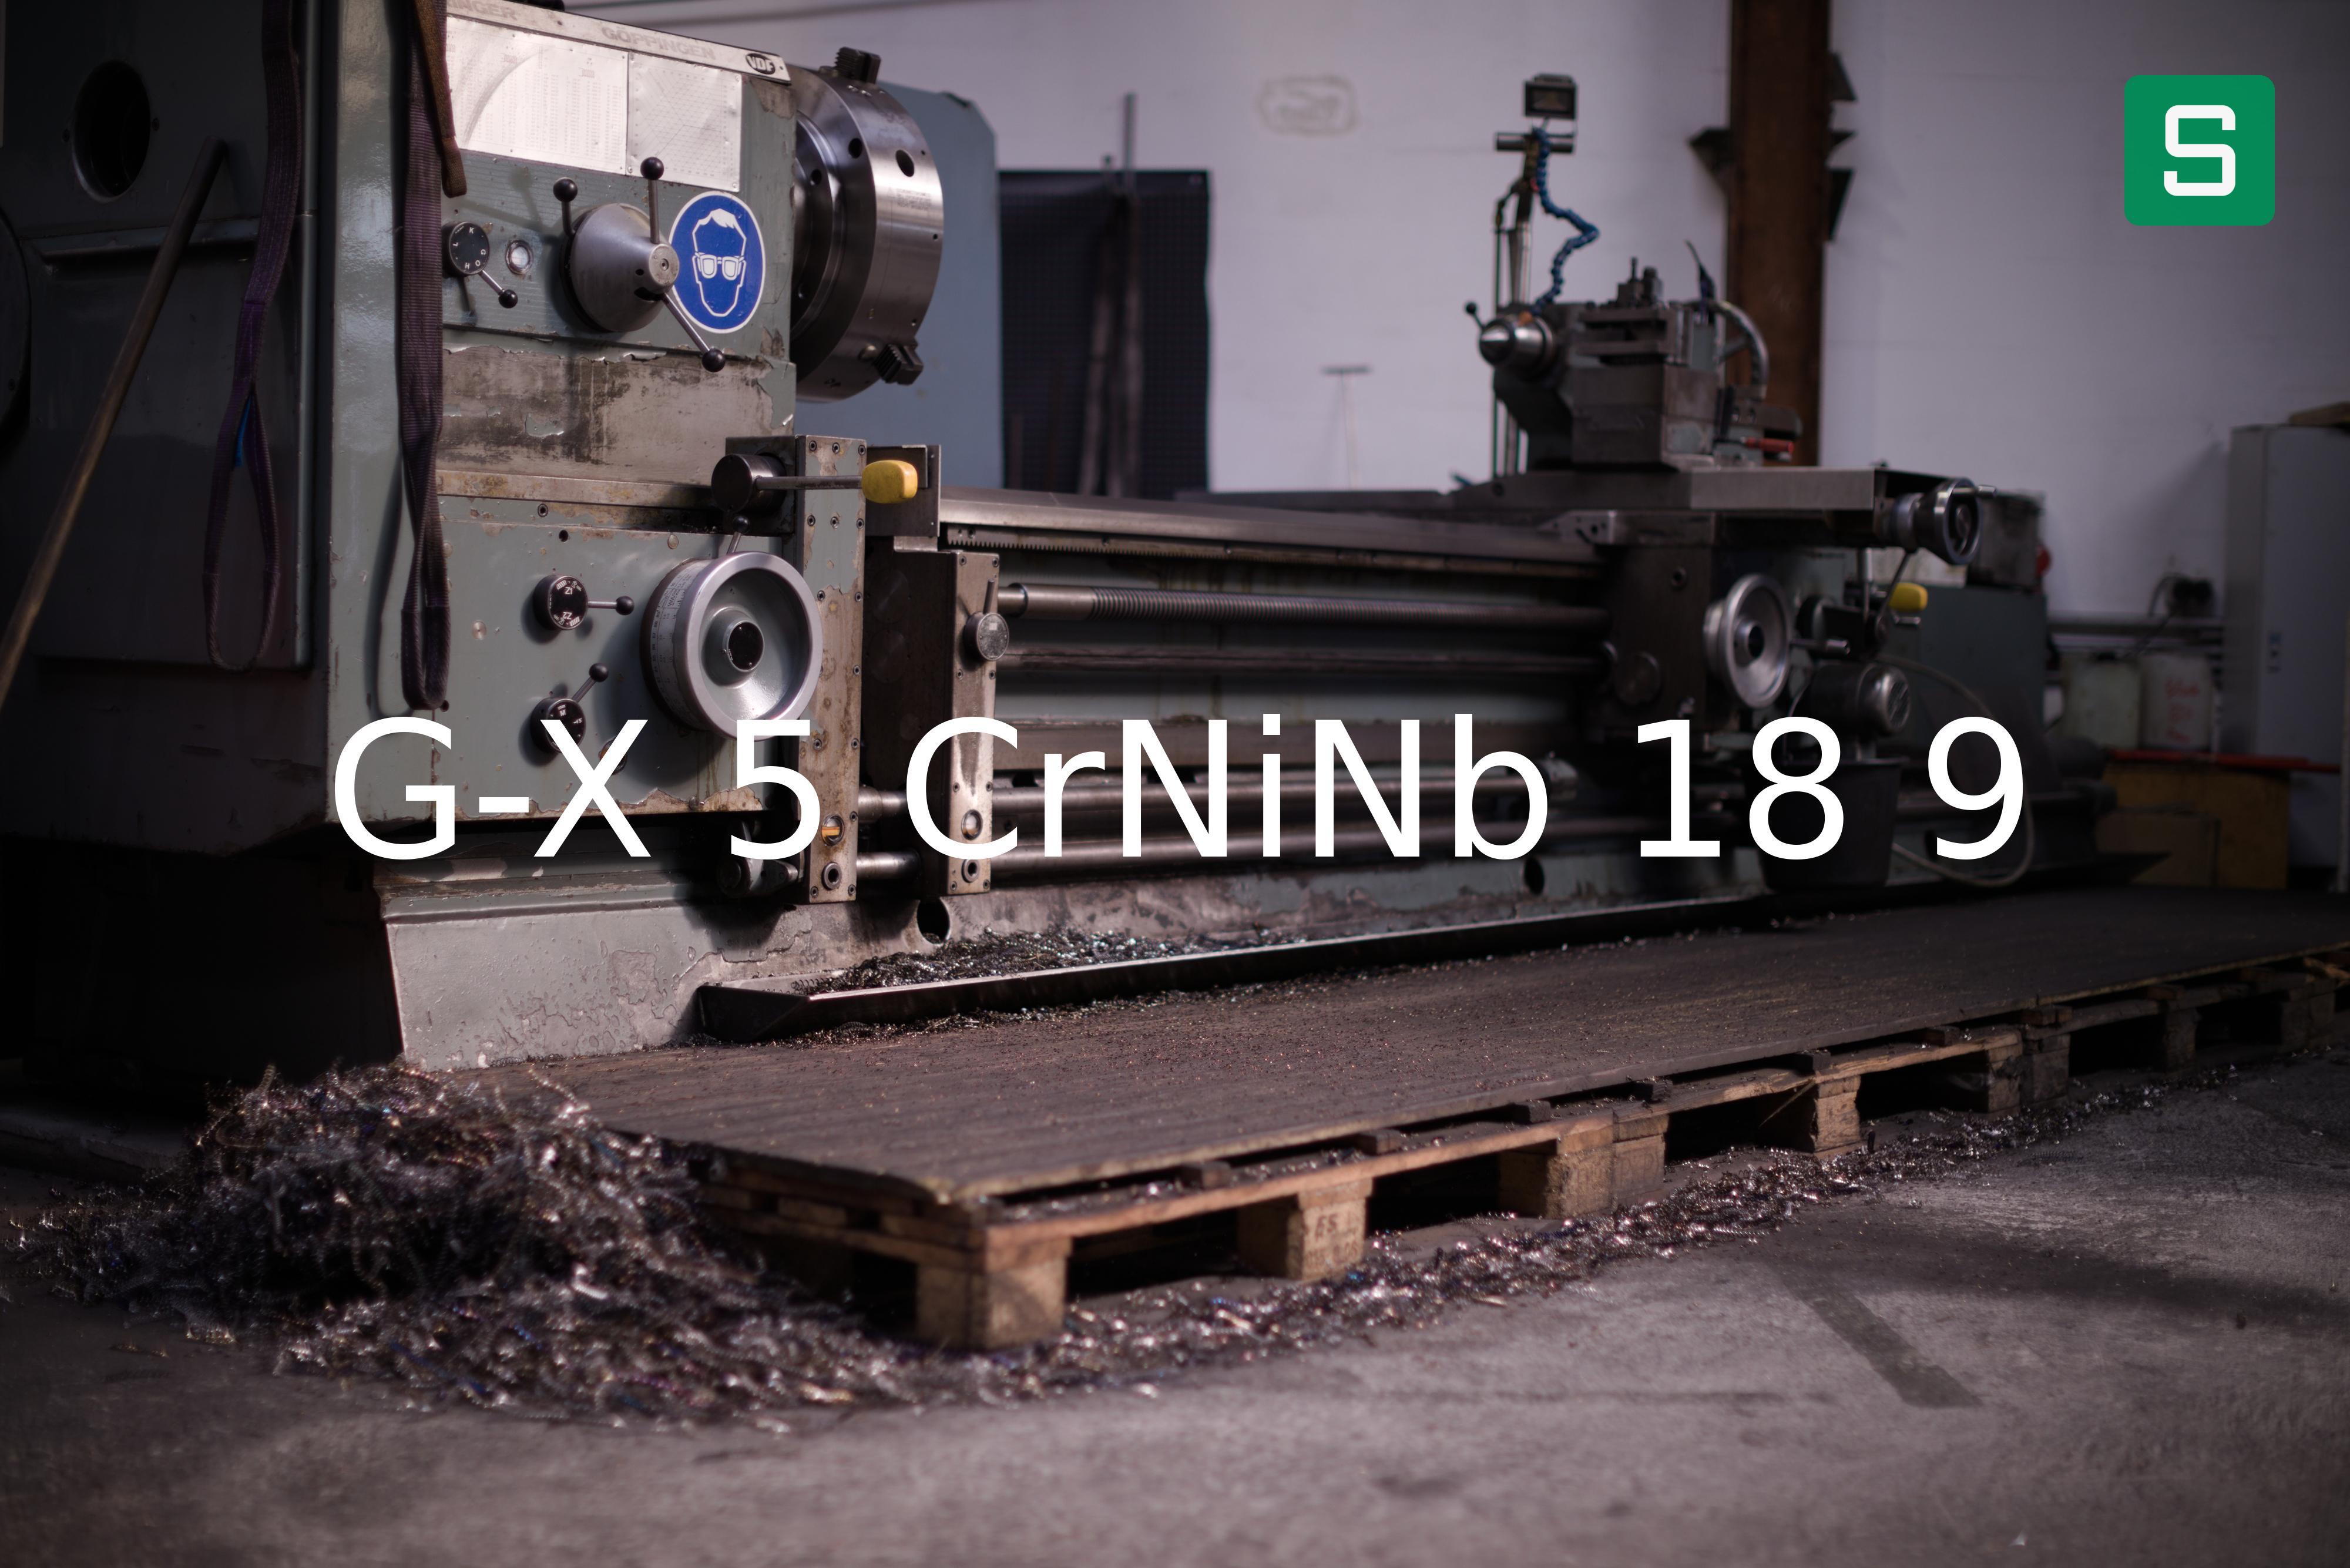 Steel Material: G-X 5 CrNiNb 18 9